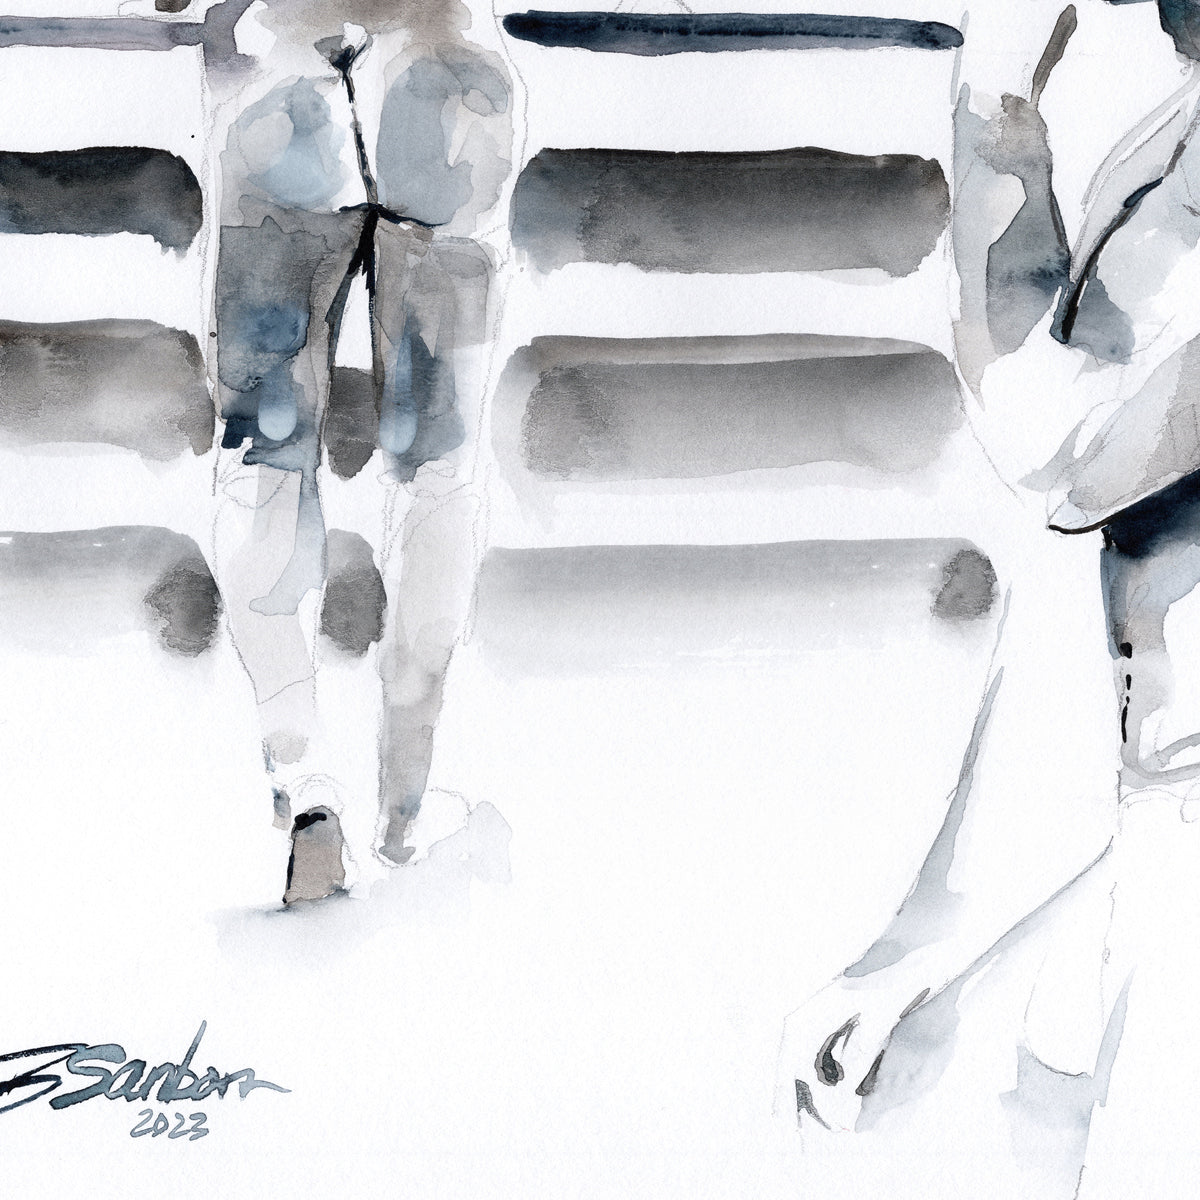 Two Male Figures, Muscular Seated Man and Standing Figure with Defined Buttocks - 9x12" Original Watercolor Painting